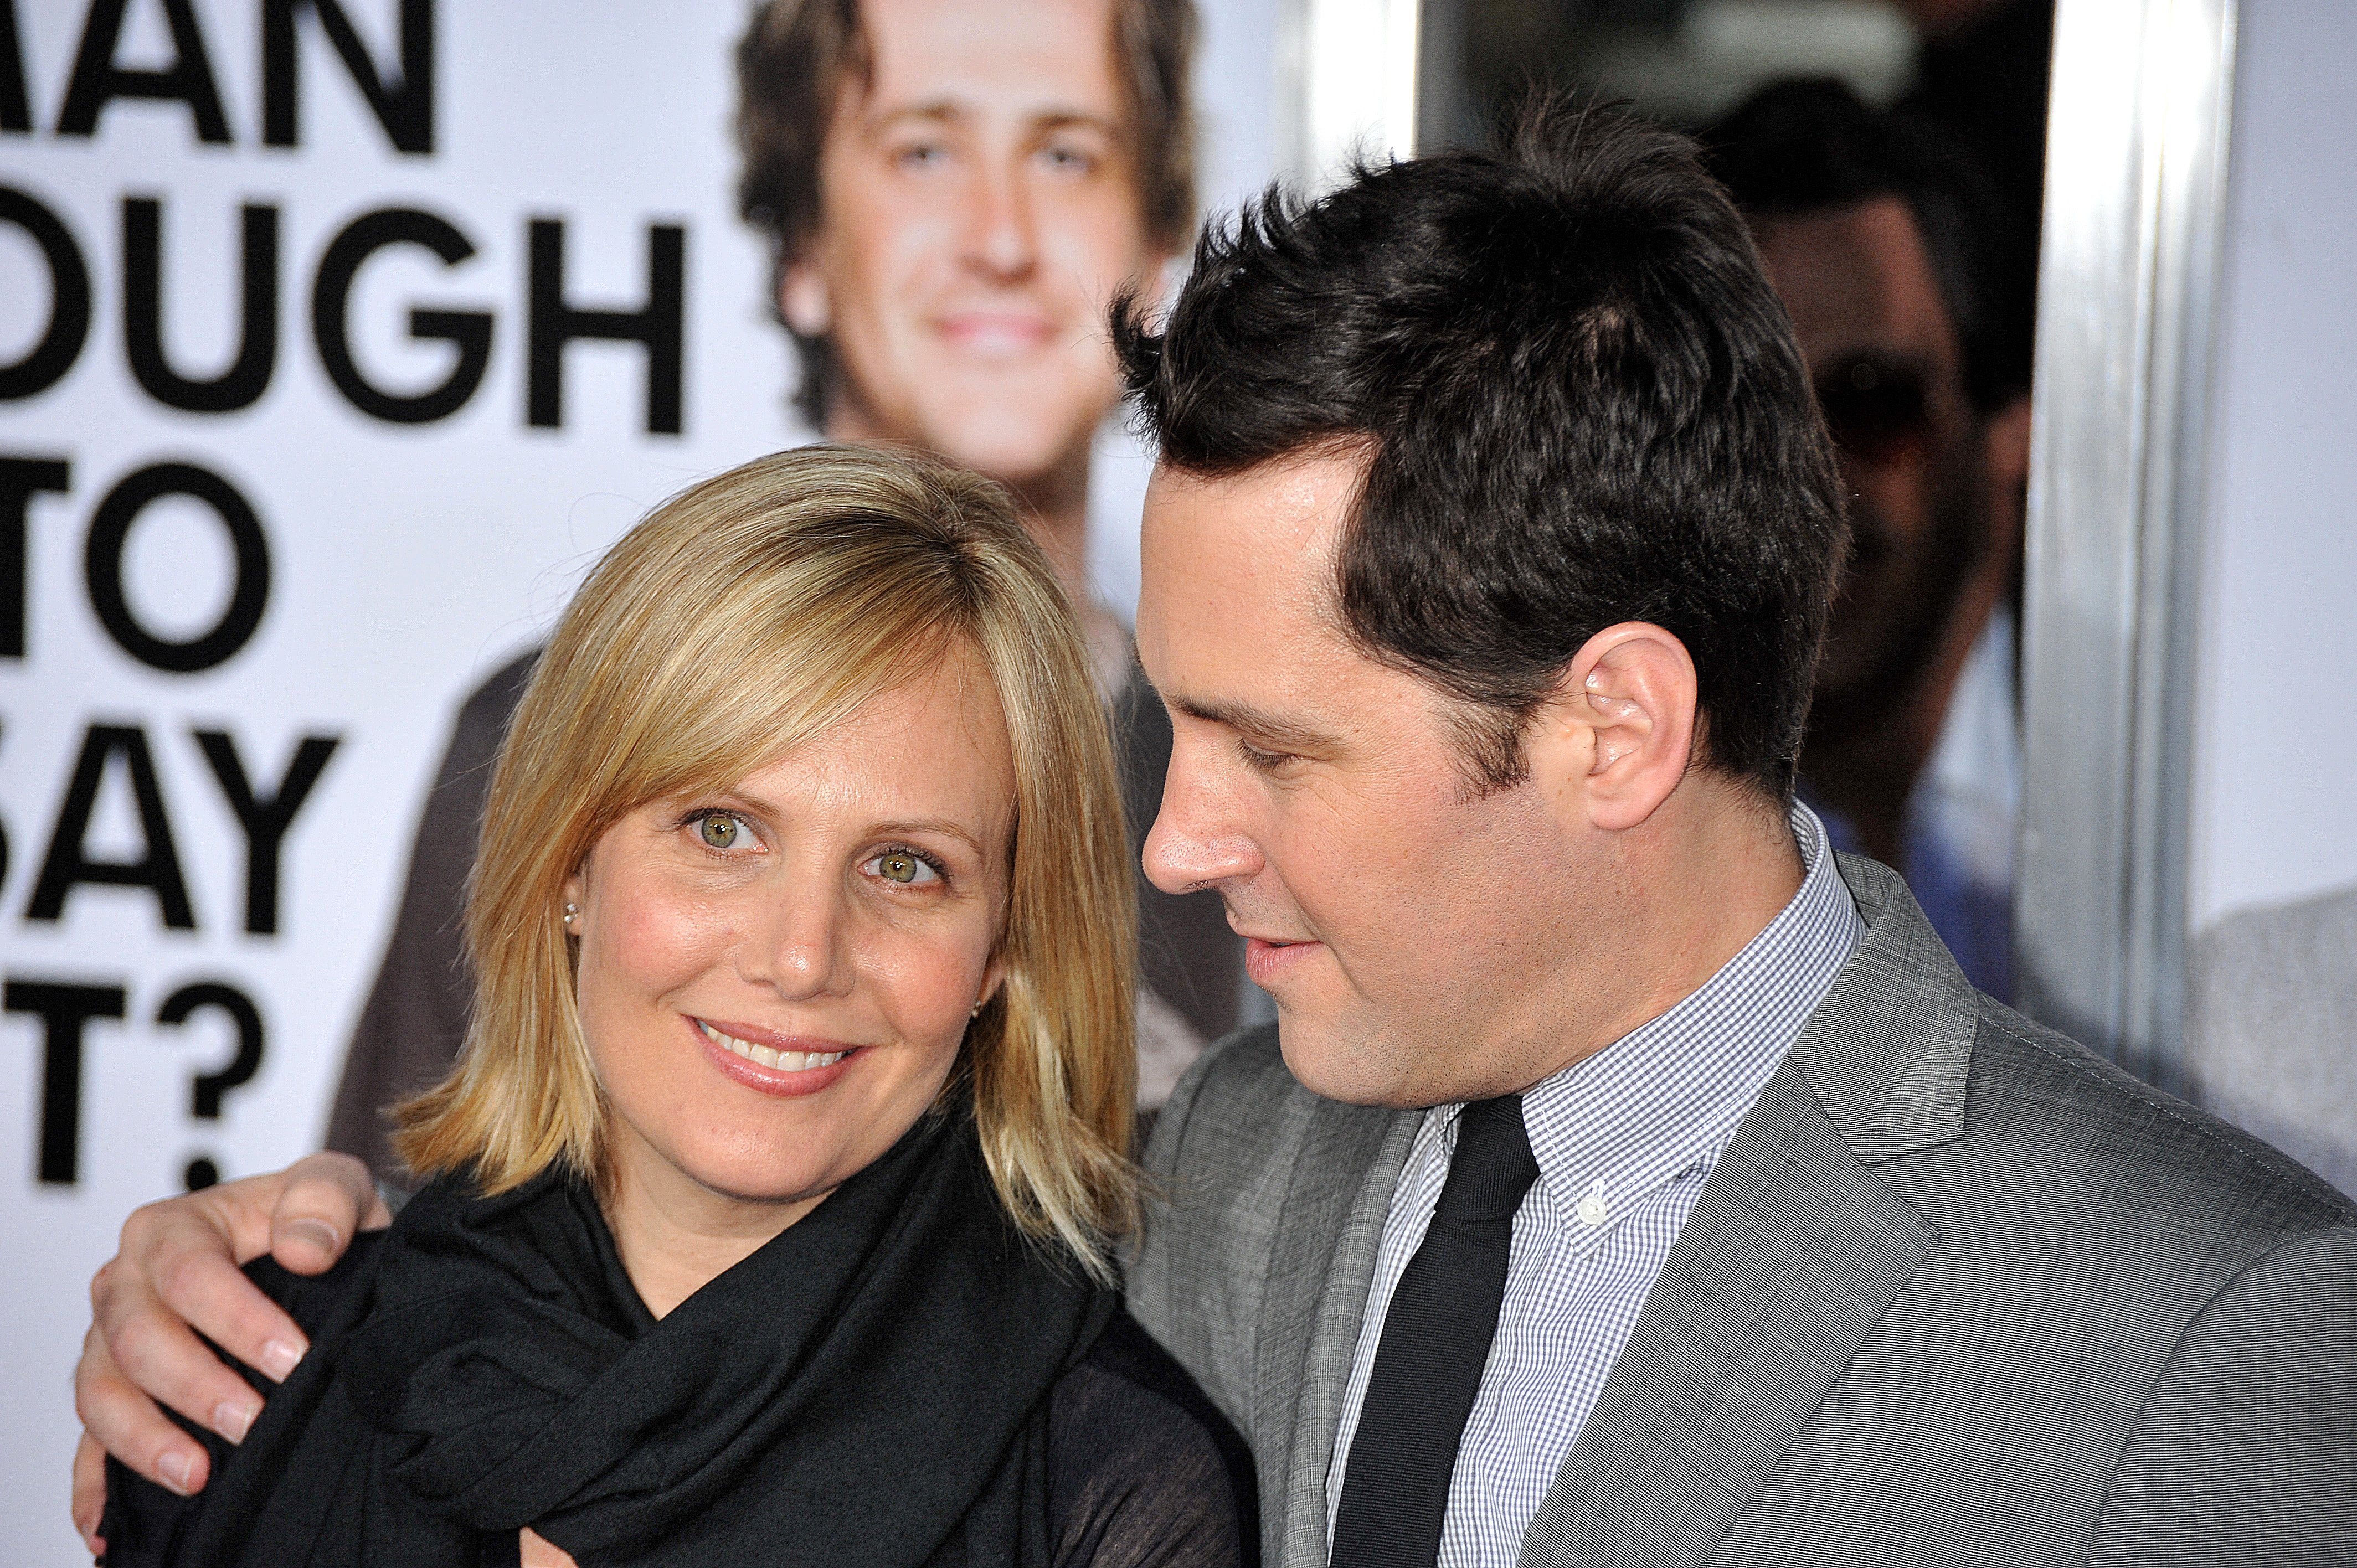 Paul Rudd and his wife Julie Yaeger attend the premiere of "I Love You, Man" at Mann's Village Theater in Westwood, California. | Source: Getty Images